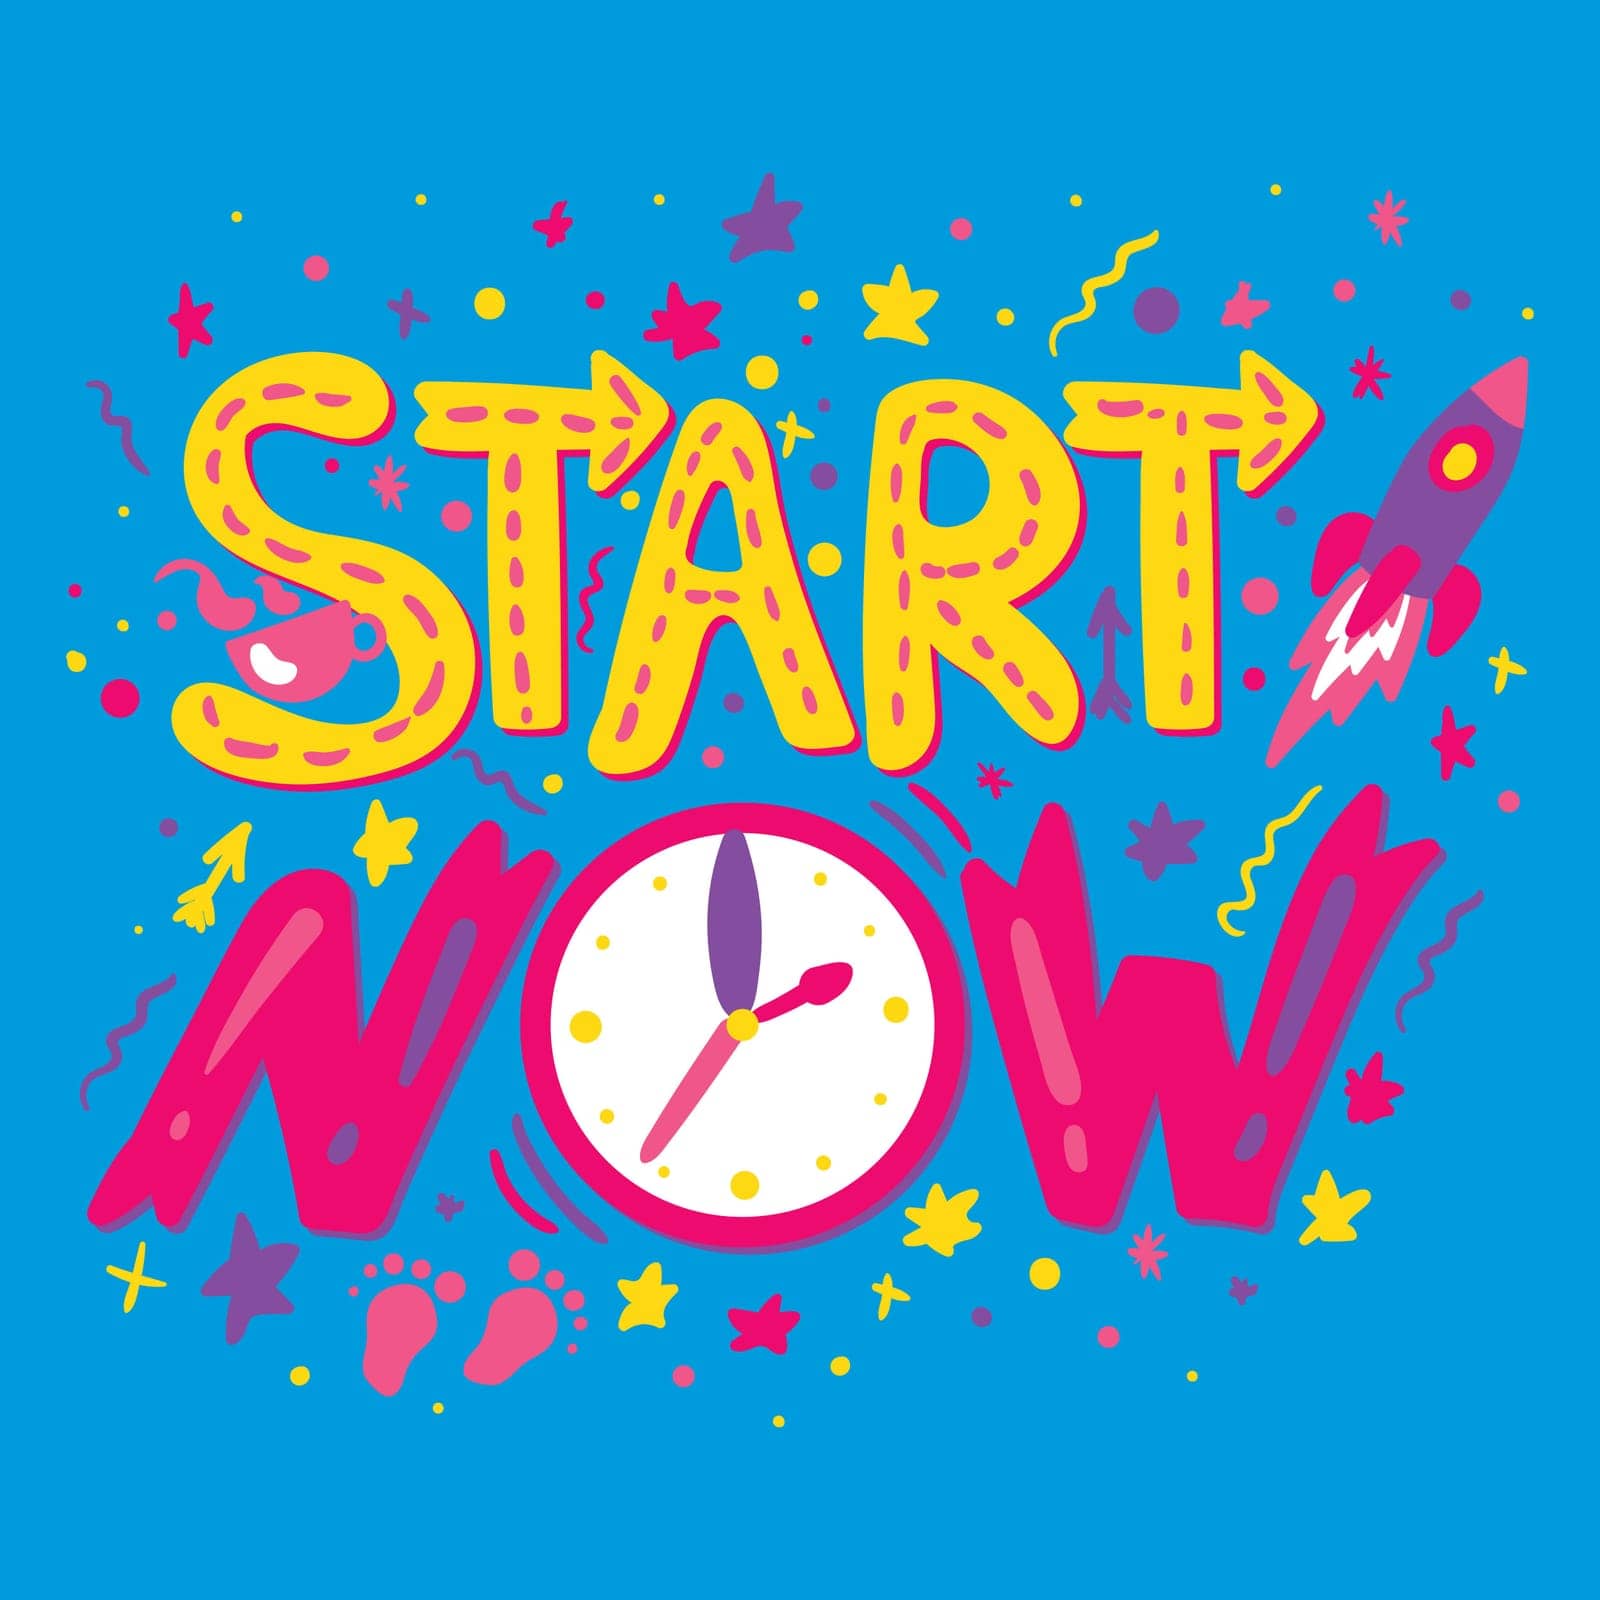 Start now hand drawn vector lettering. Motivational quote. Time management poster, banner template